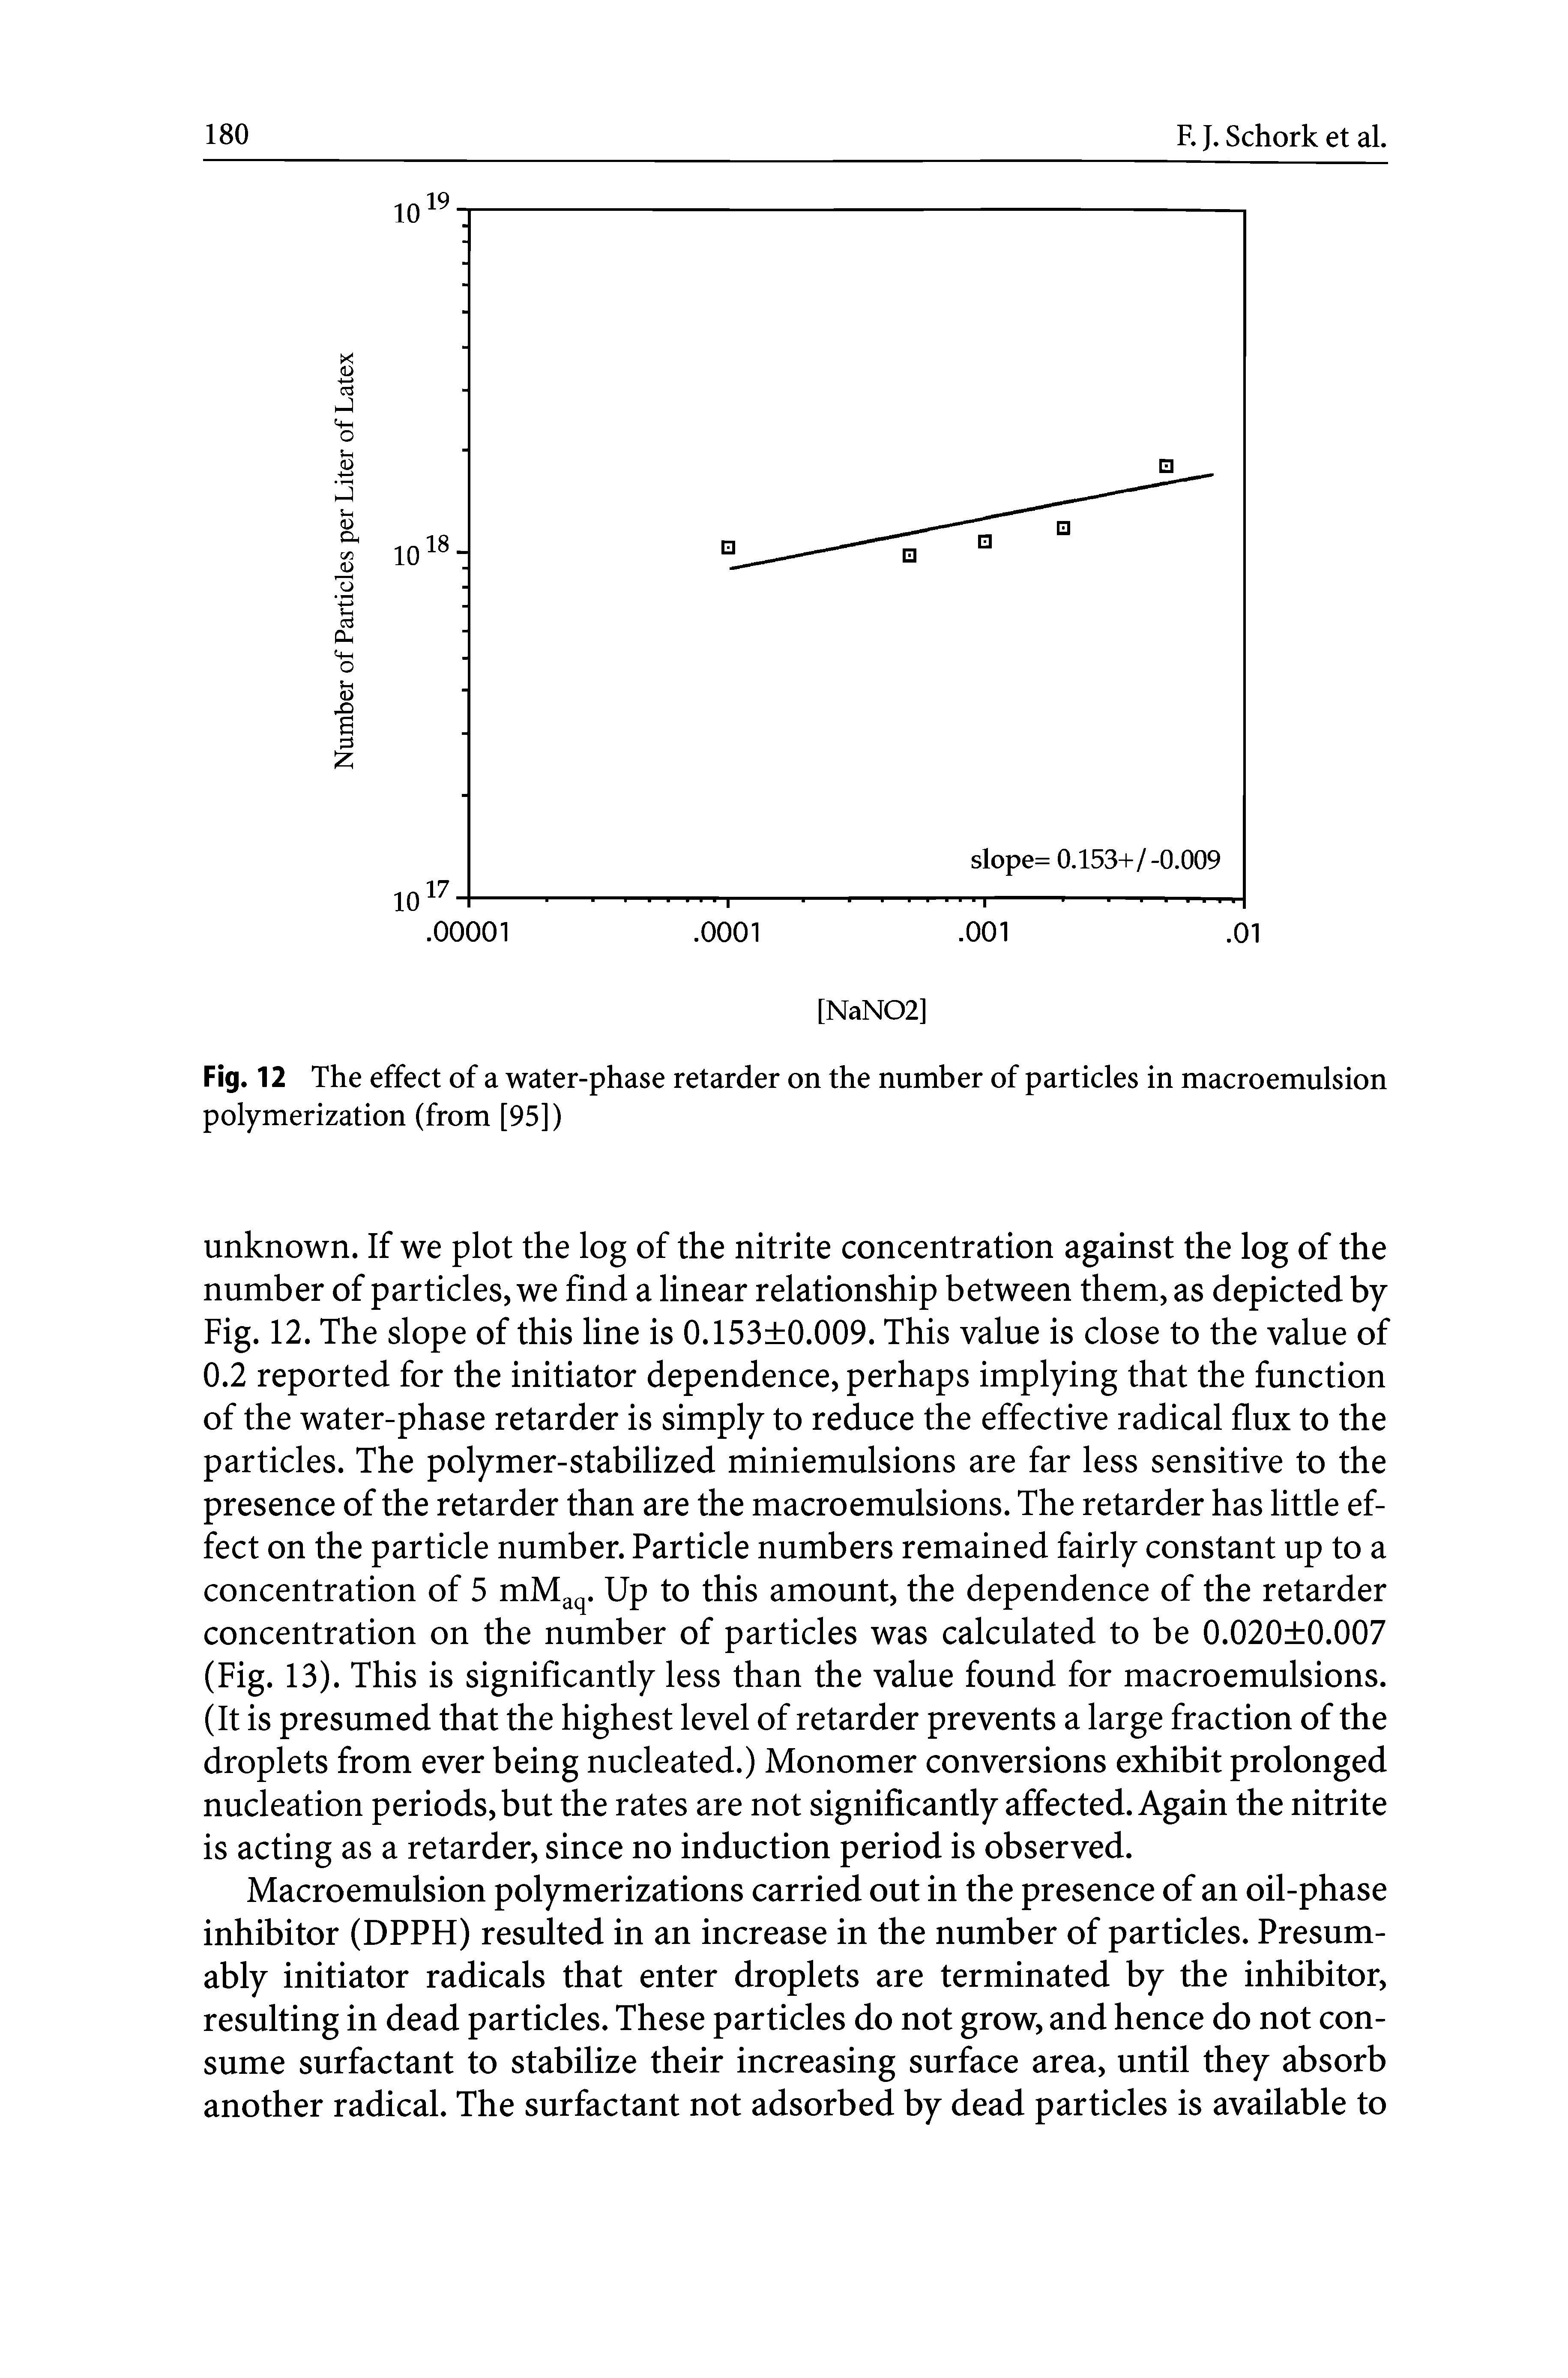 Fig. 12 The effect of a water-phase retarder on the number of particles in macroemulsion polymerization (from [95])...